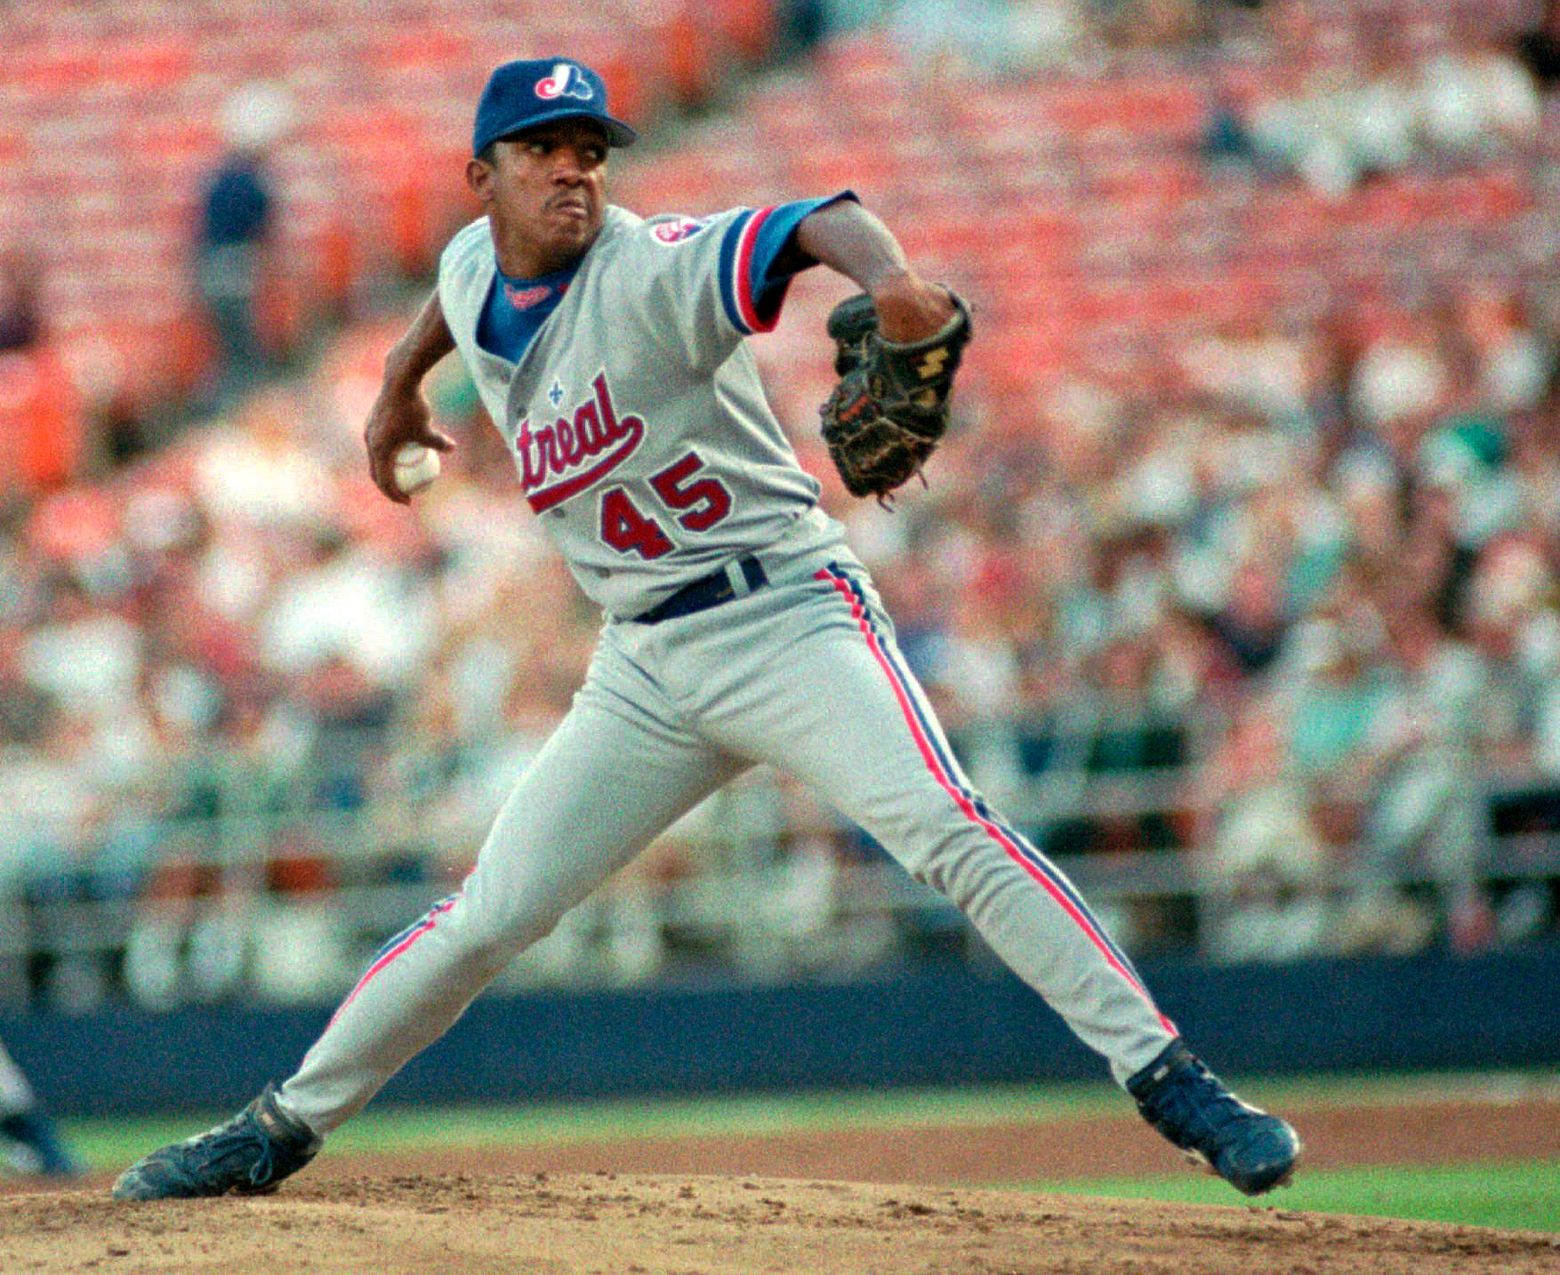 Nats in World Series 25 years after Expos never got chance